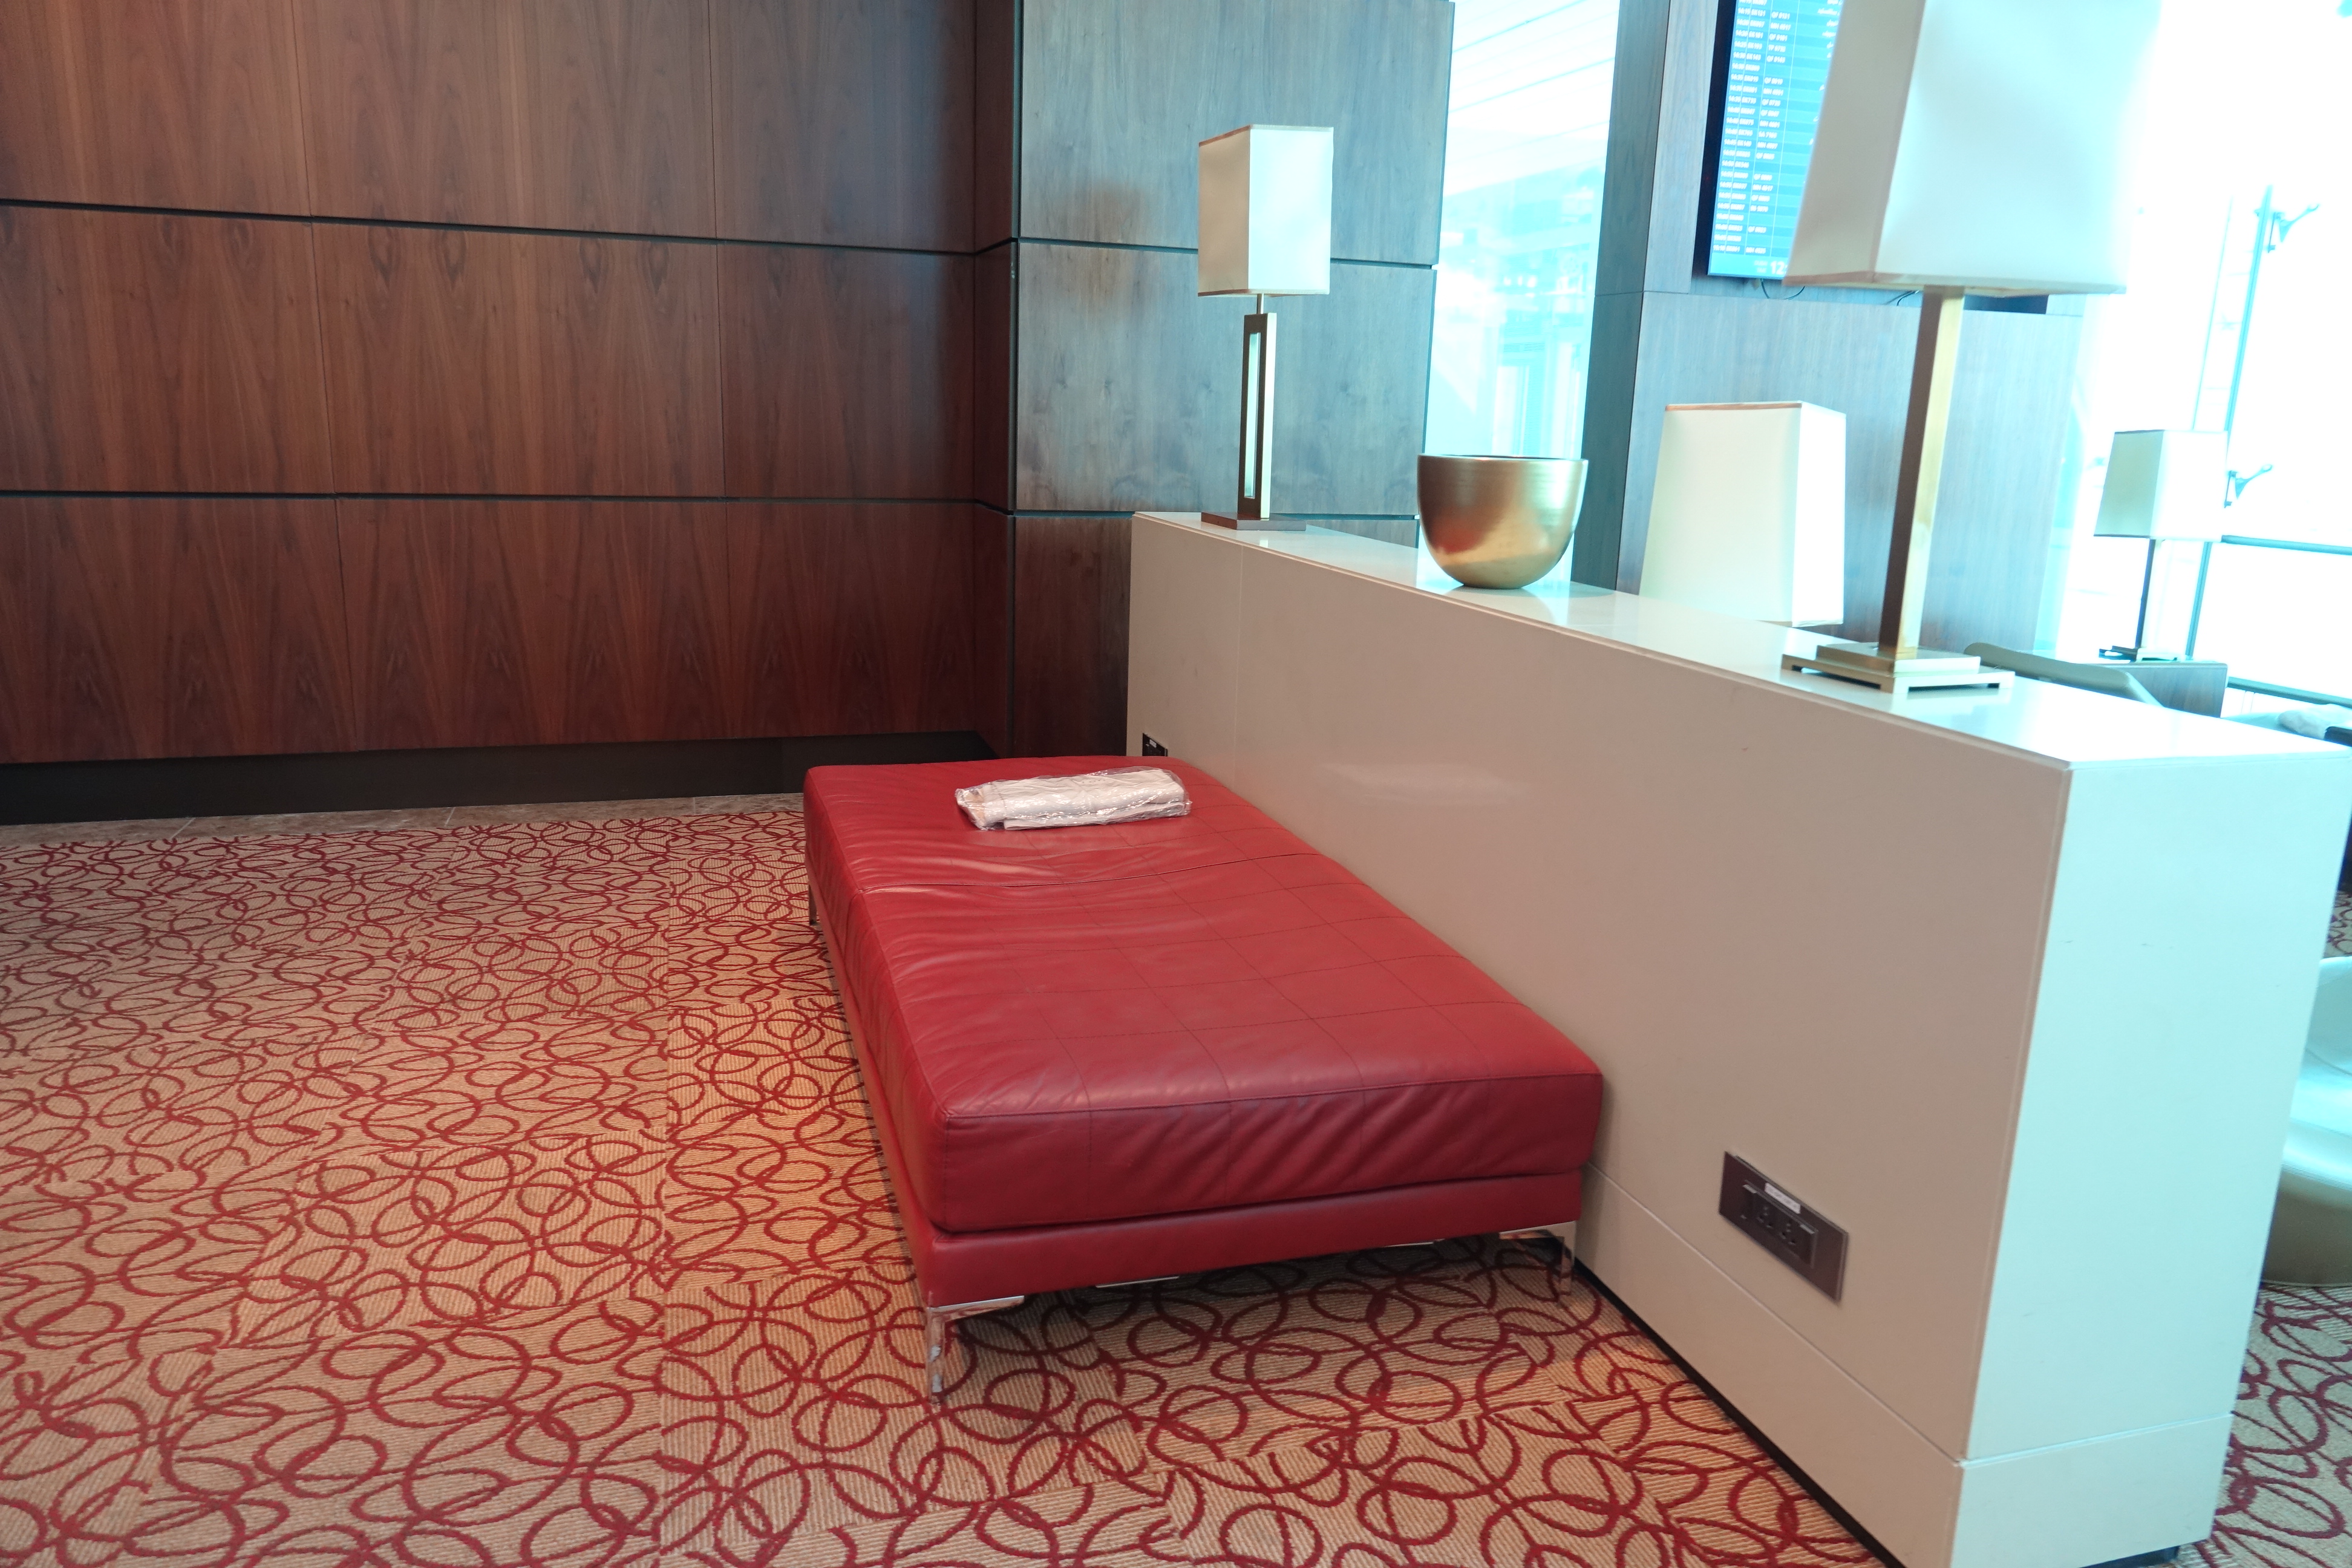 a red ottoman in a room